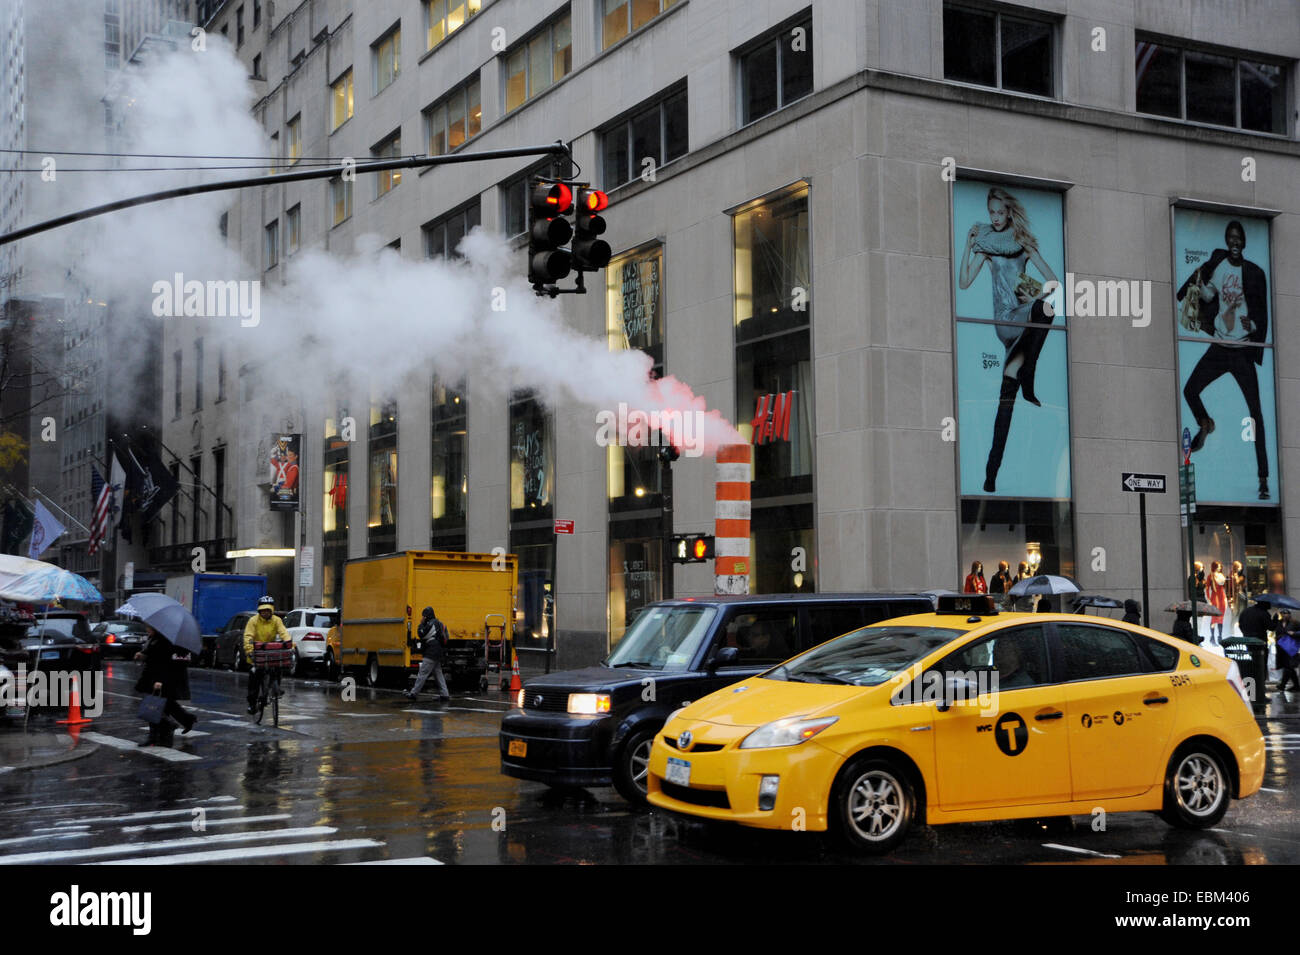 Manhattan New York USA   - Steam rises from a subway pipe in Fifth Avenue in pouring rain with yellow cab Stock Photo